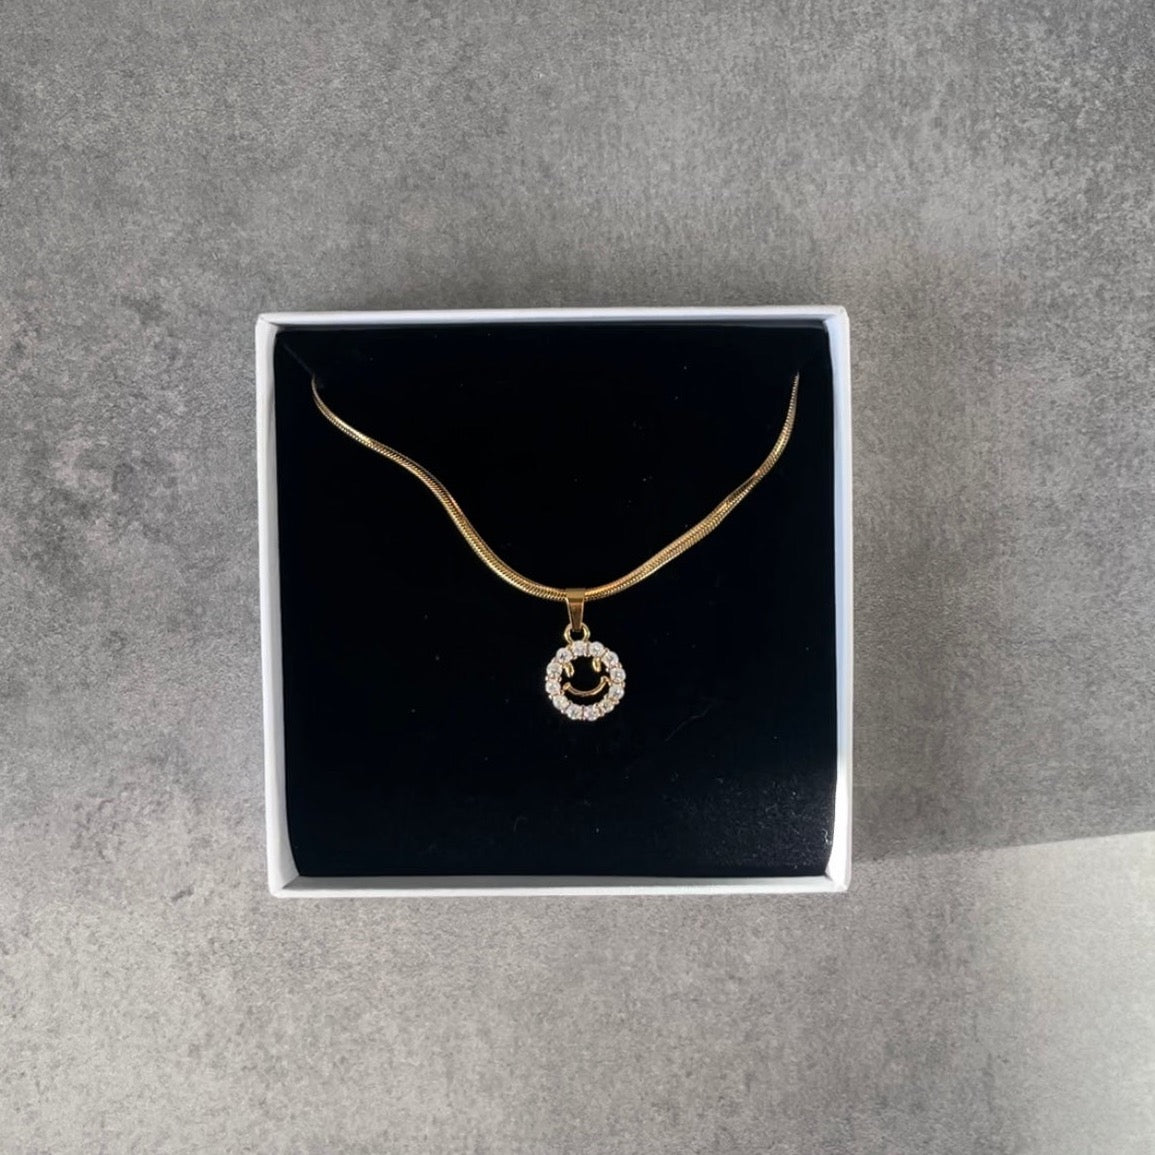 Gold Smiley Face Necklace - Cosmic Chains 